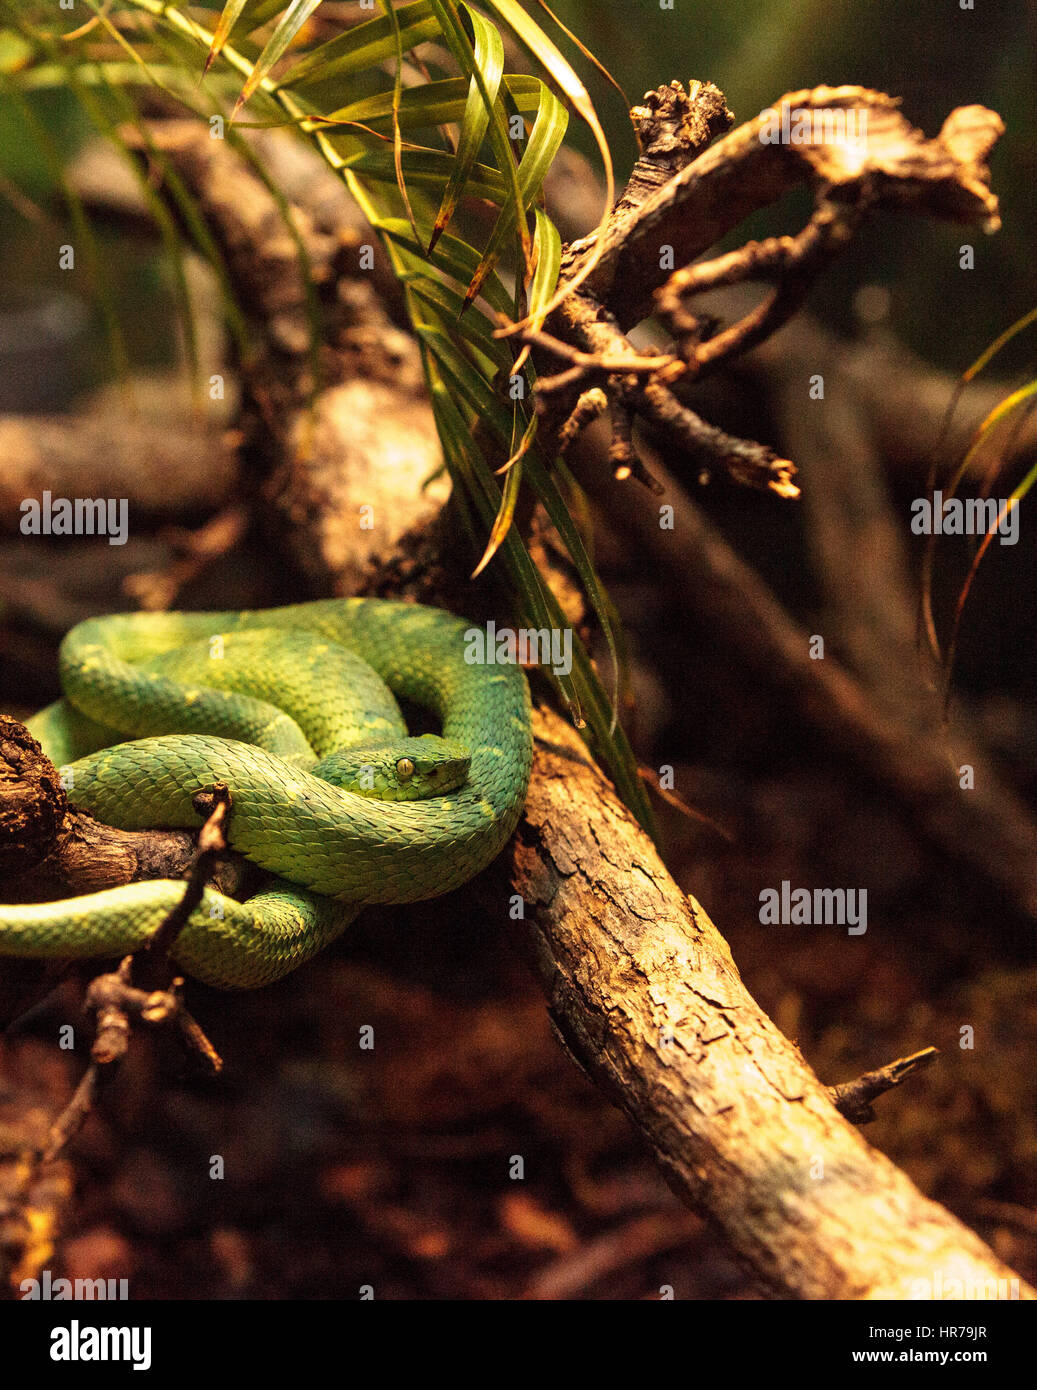 Side striped palm pit viper known as Bothriechis lateralis is found in forests of Costa Rica. Stock Photo